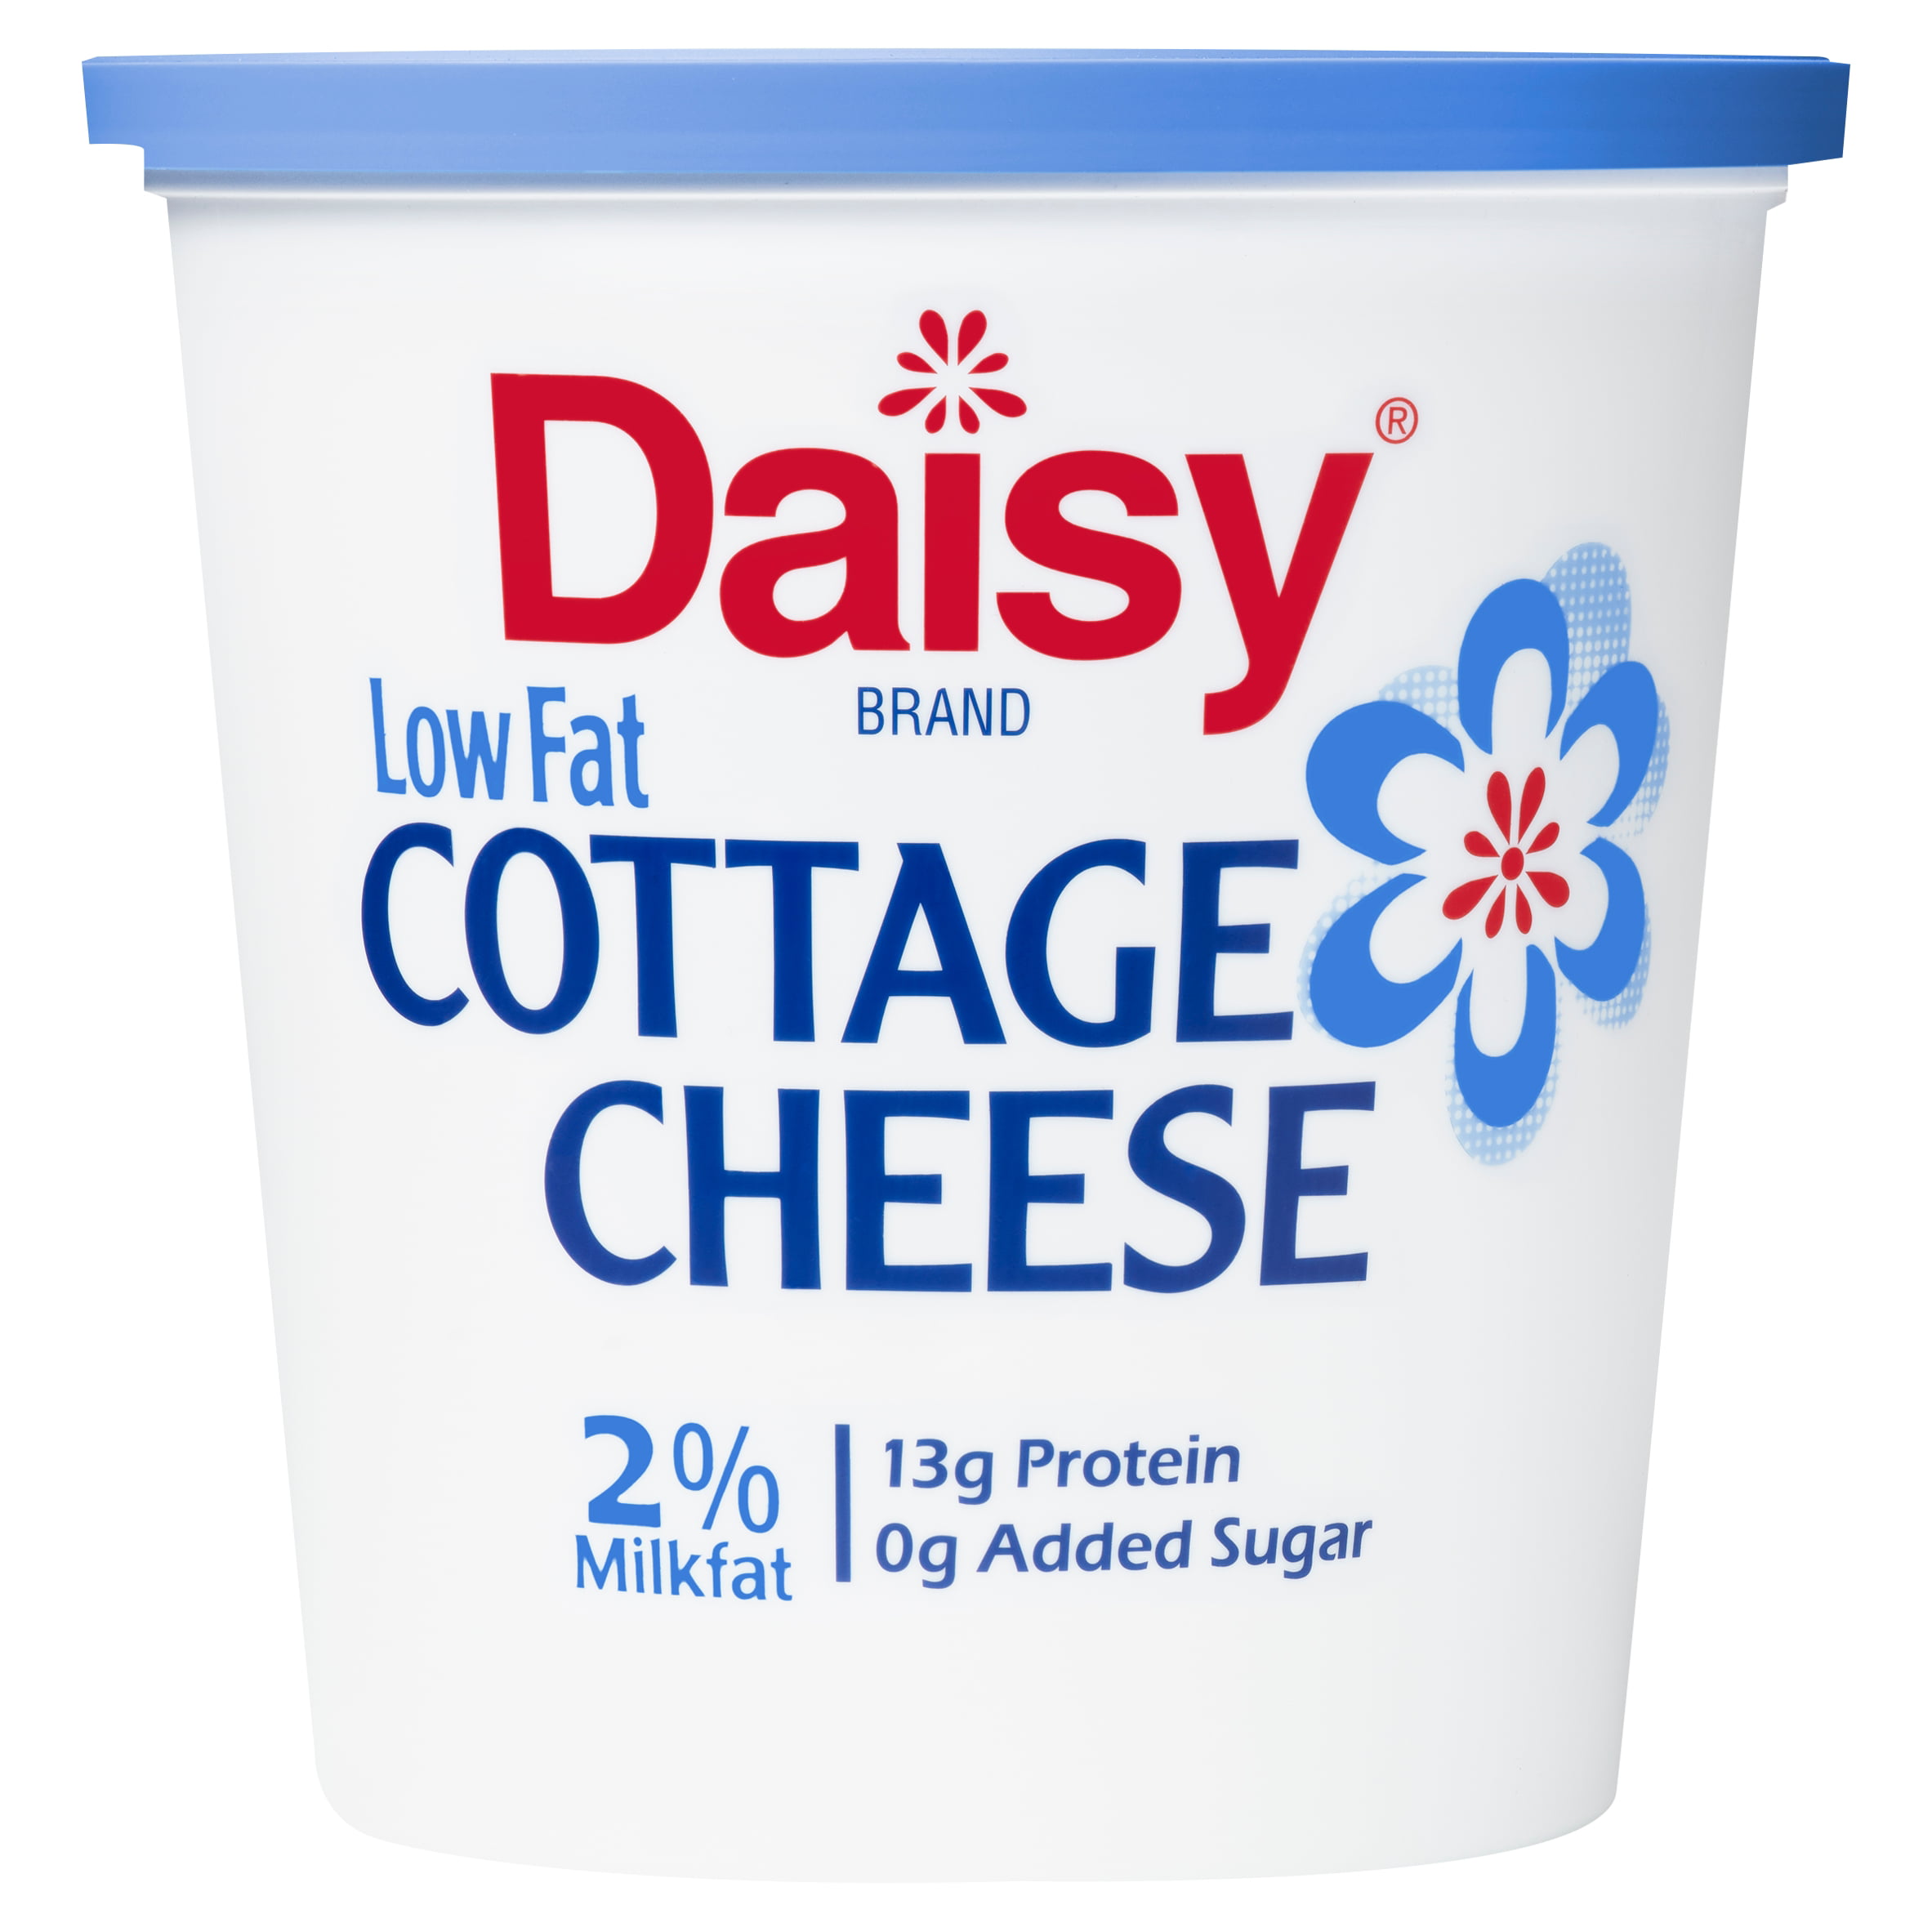 Daisy Low Fat Cottage Cheese, 2% Milkfat, 24 ounces